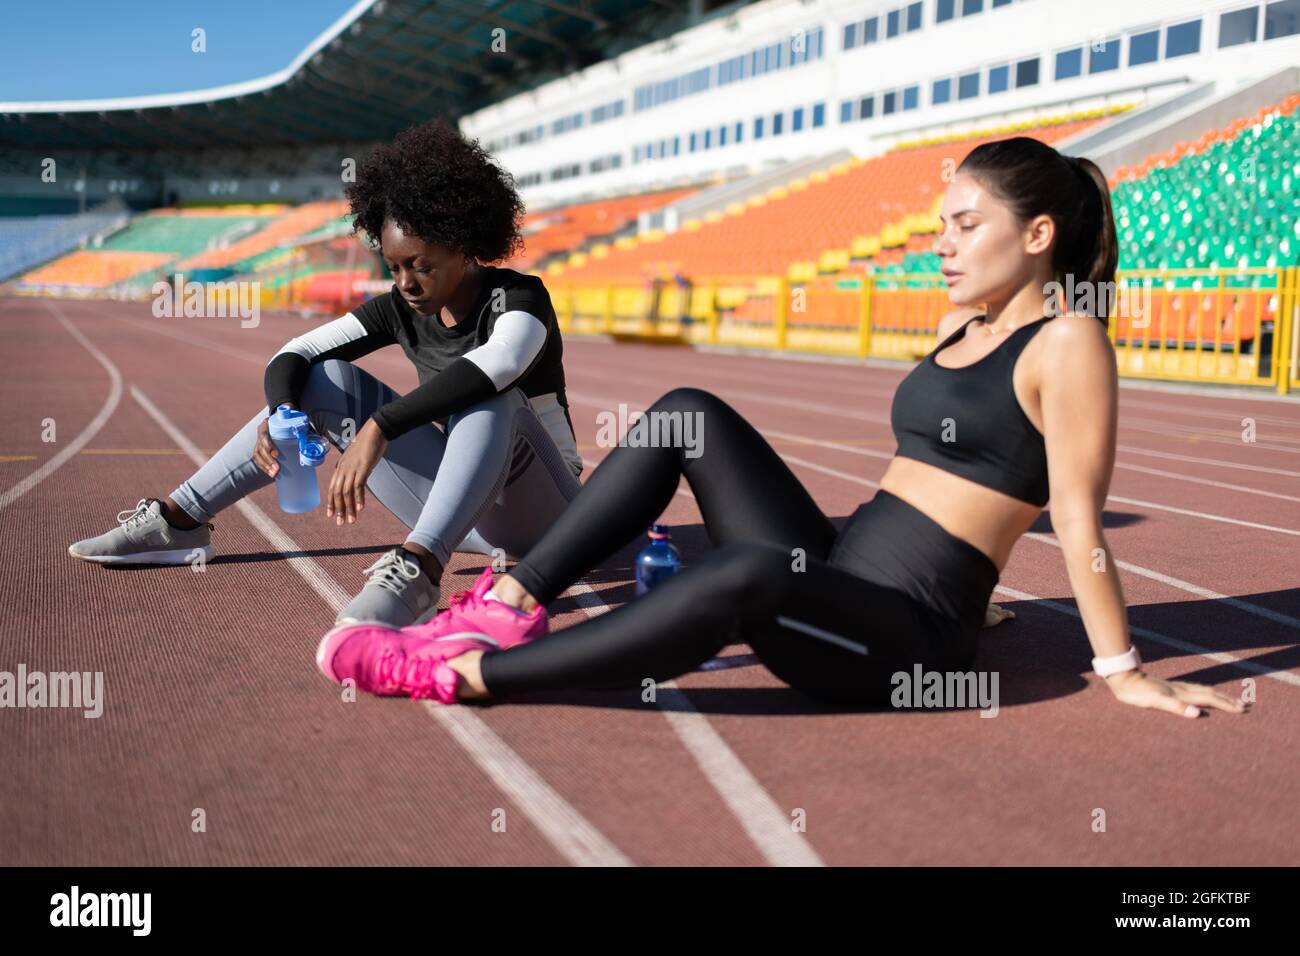 Diverse exhausted runners sitting on track and resting during break on stadium Stock Photo